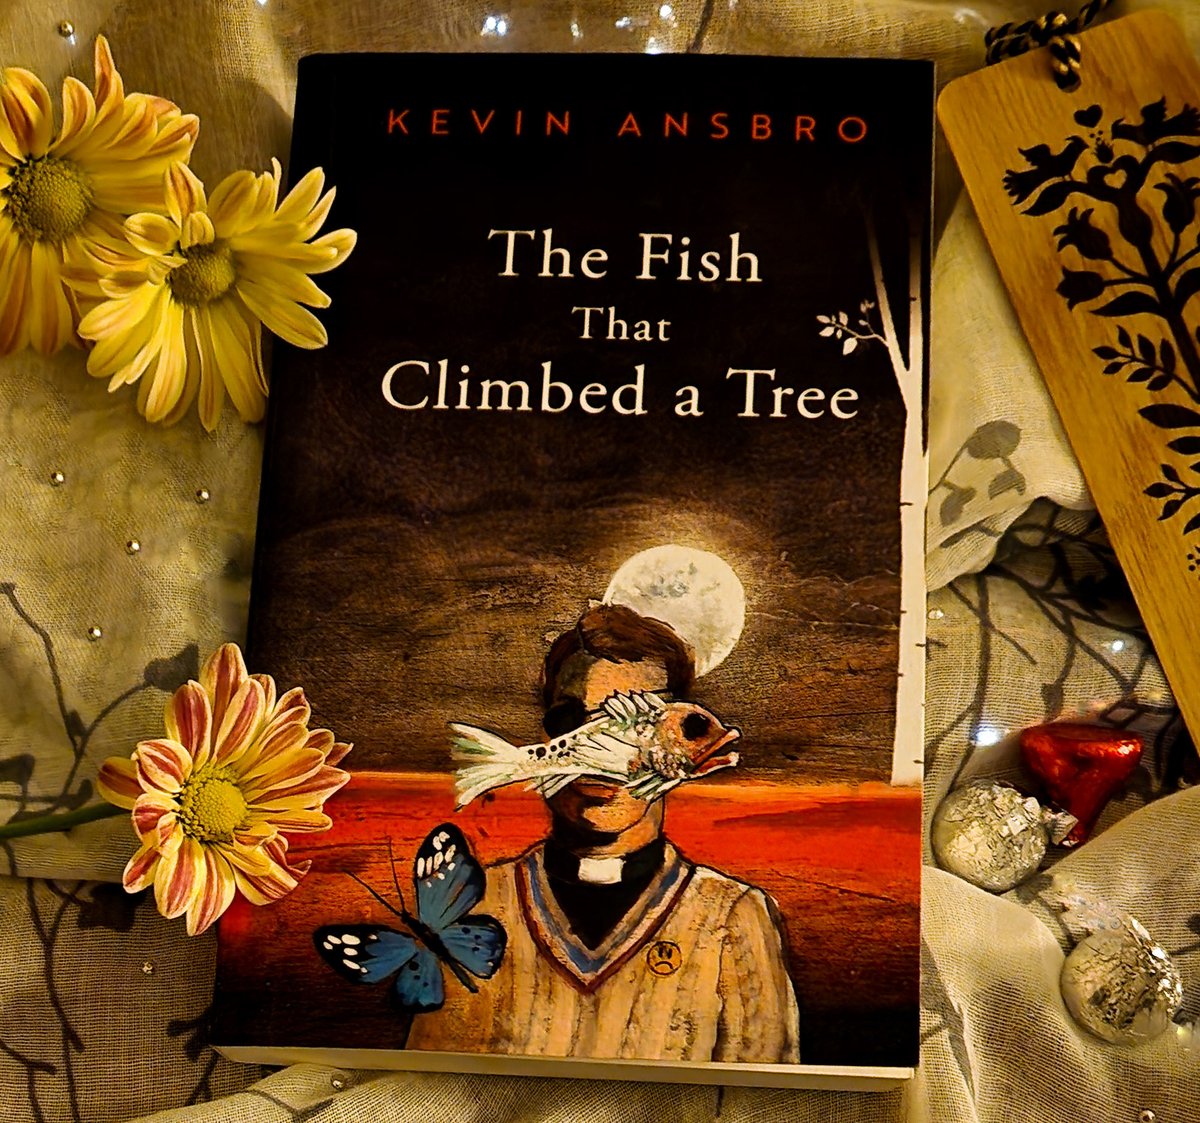 This novel is a stroll through the darkest parts of humanity, and also a rocket ship ride to paradise. 🚀 Five brilliant stars! #TheFishThatClimbedaTree My #bookreview on #goodreads 👉goodreads.com/review/show/27… #amreading @kevinansbro #Magicalrealism #Bookbloggers #mustread